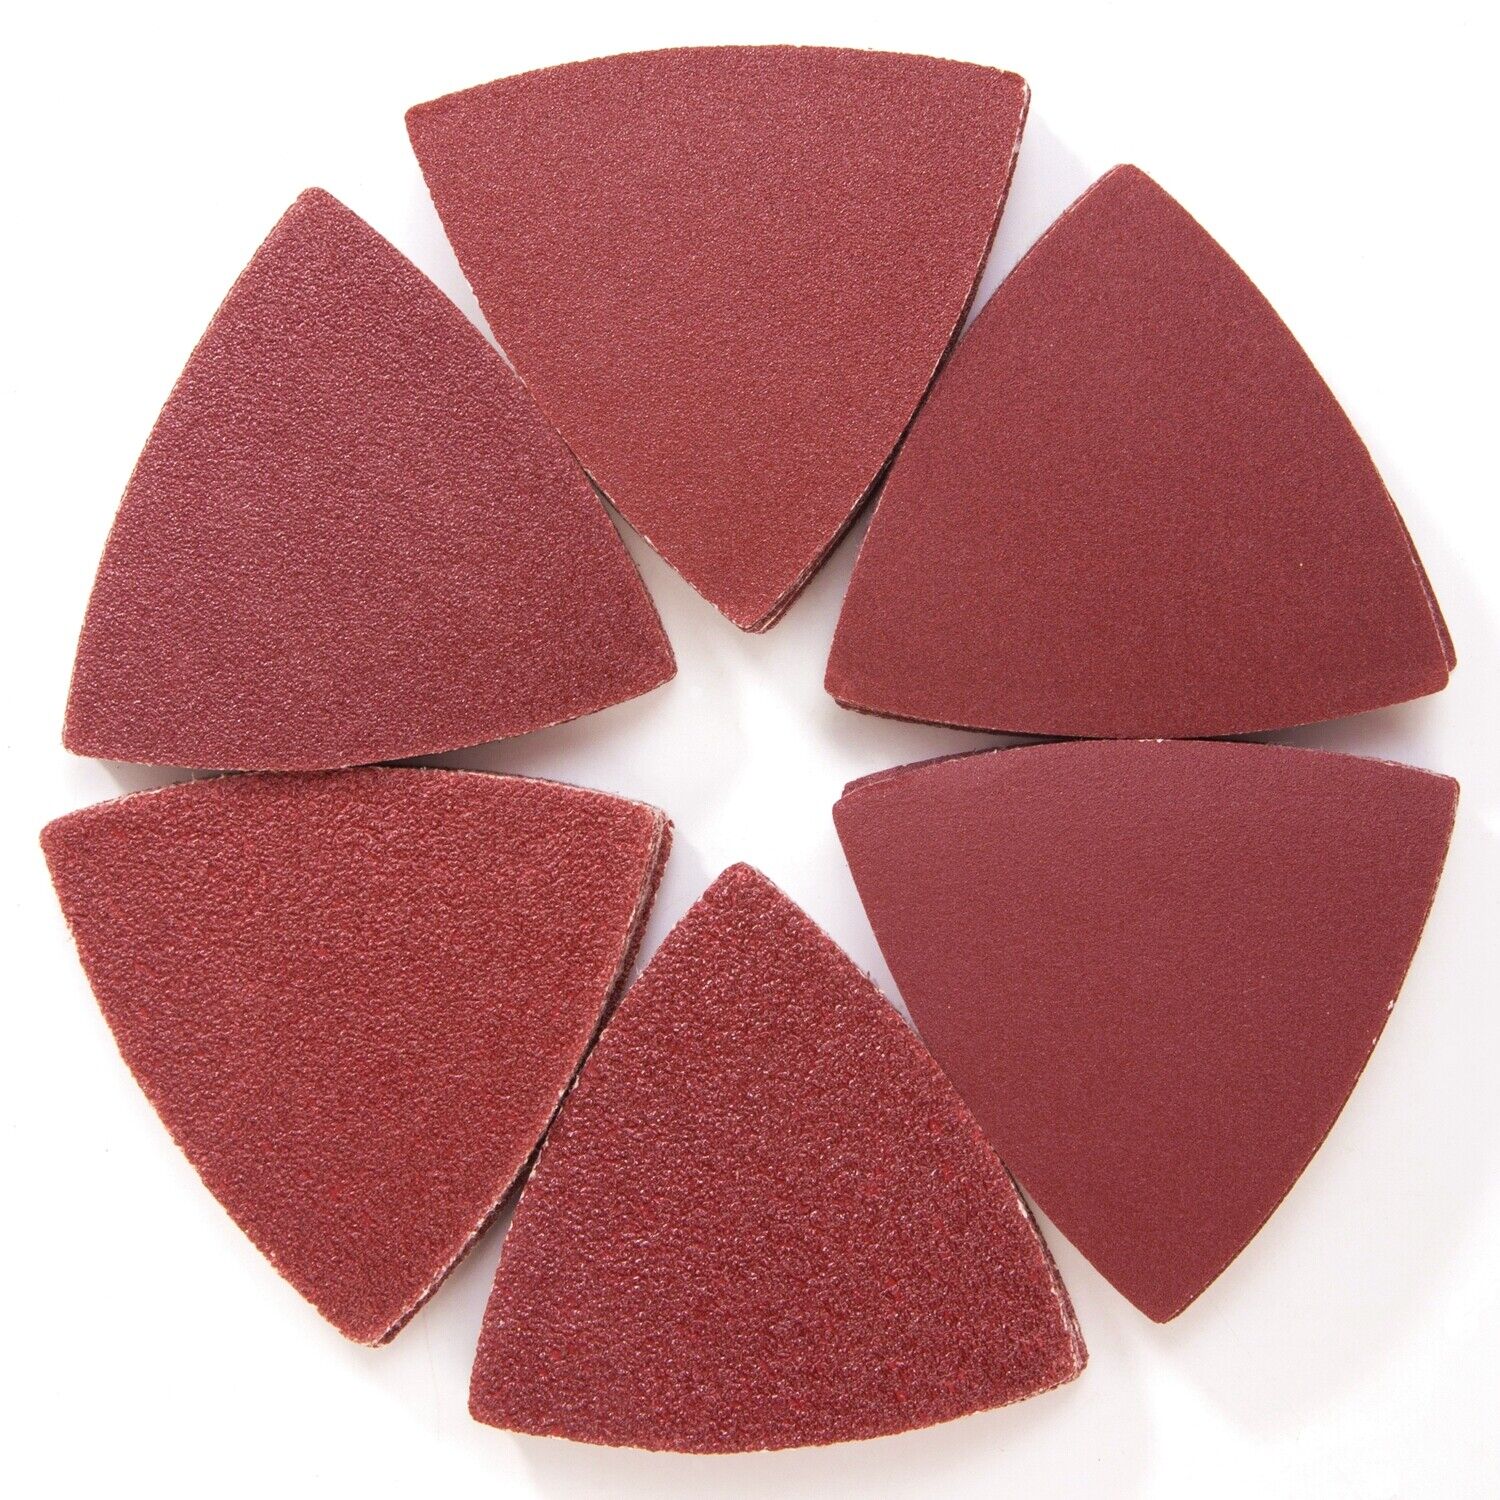 100PCS Triangle Sanding Pads for Oscillating Multi-Tool Hook Loop Sandpaper Disc Satc Does Not Apply